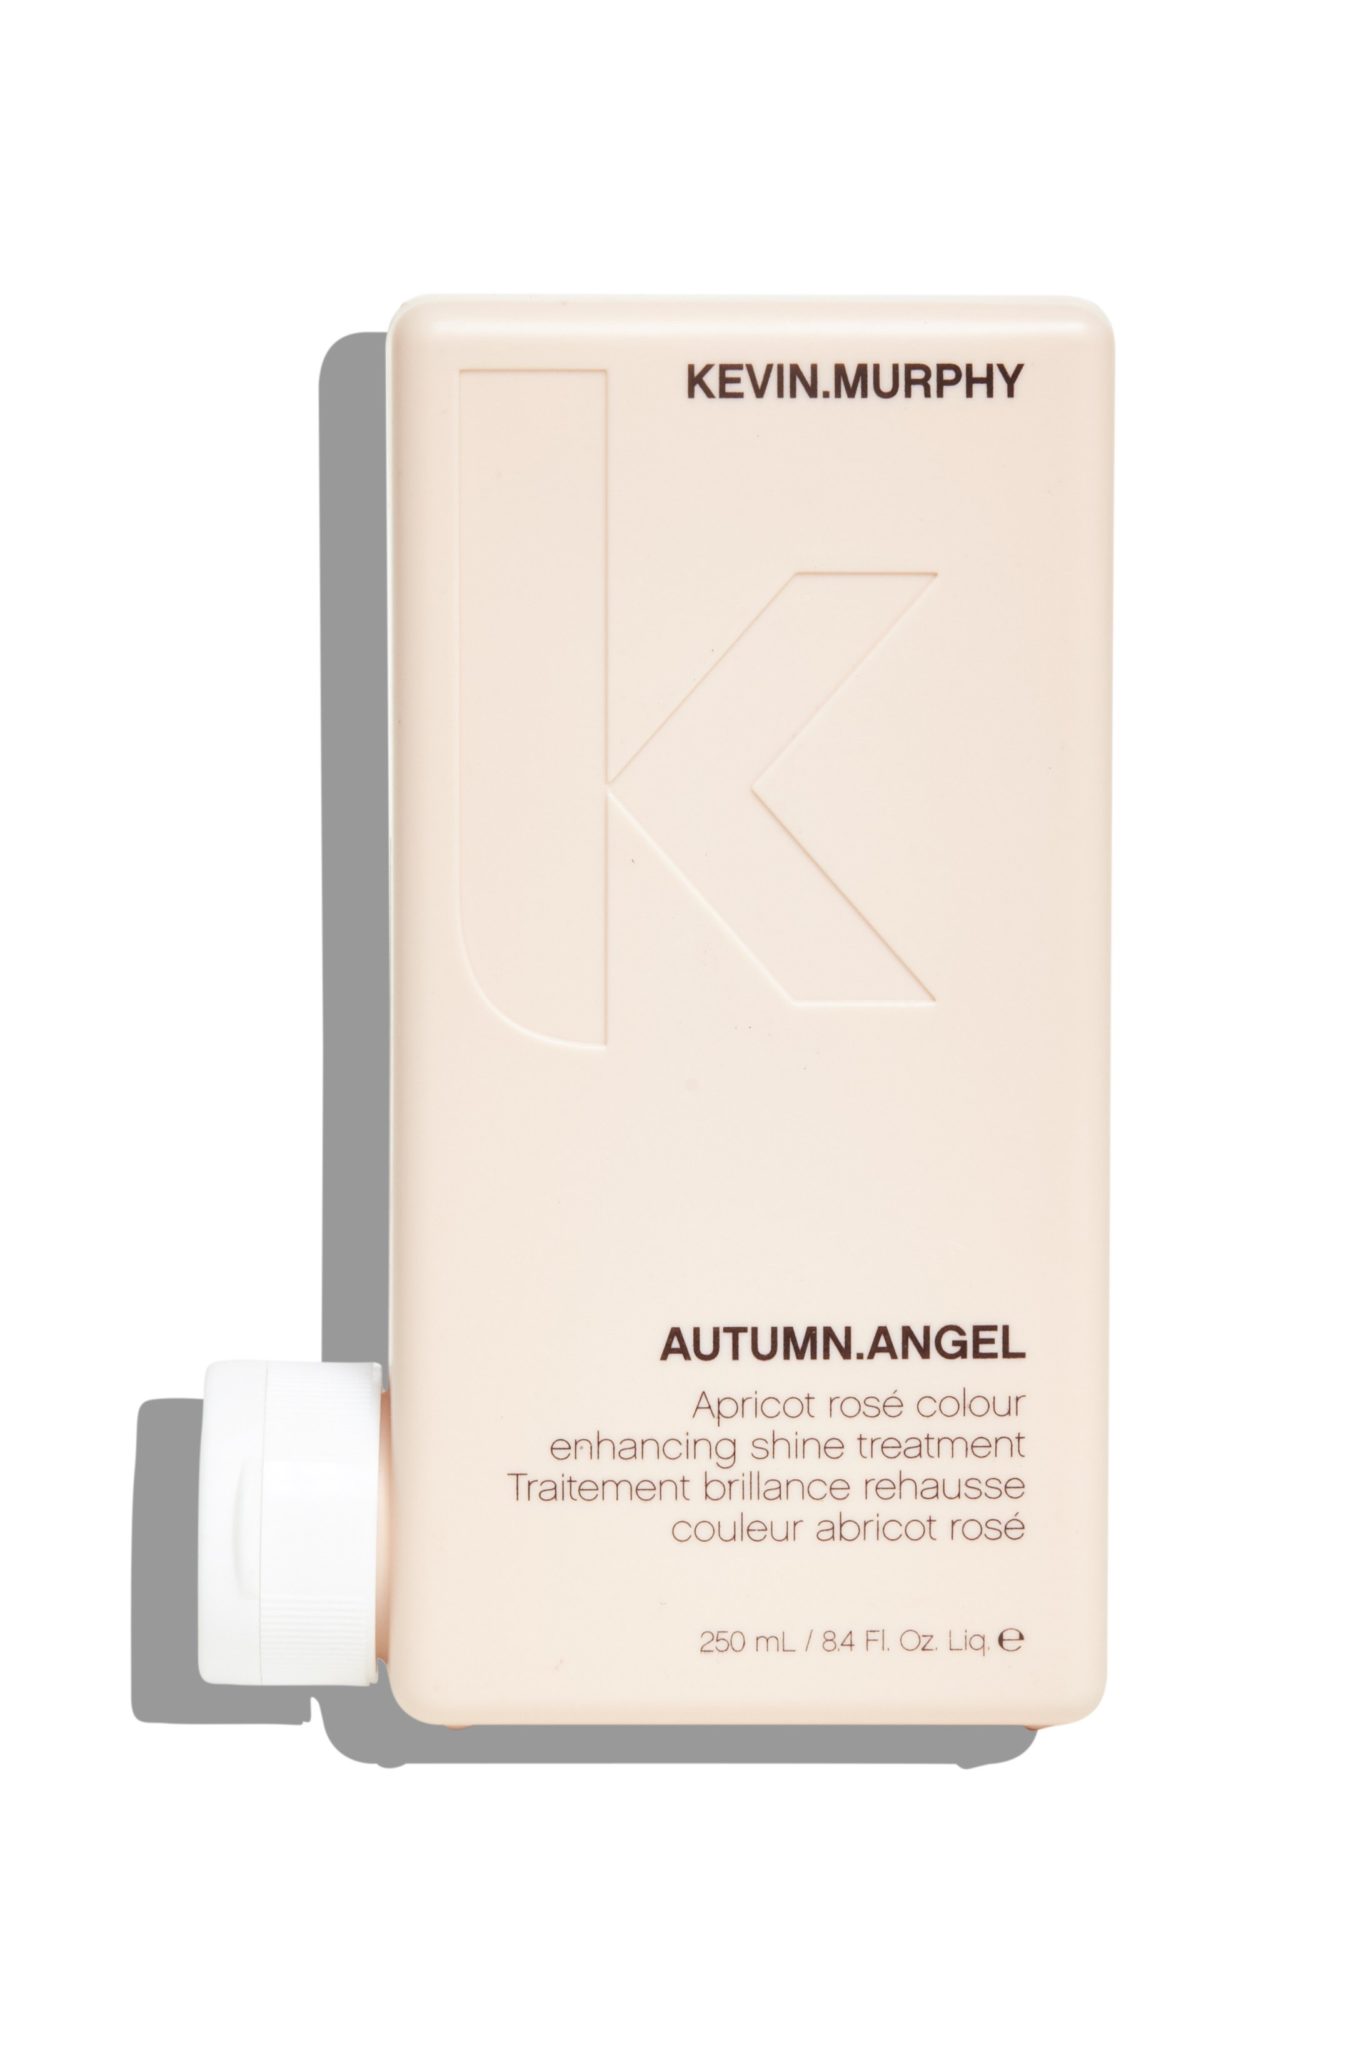 Kevin Murphy Autumn Angel 250ml - Hair products New Zealand | Nation wide  hairdressing & hair care group